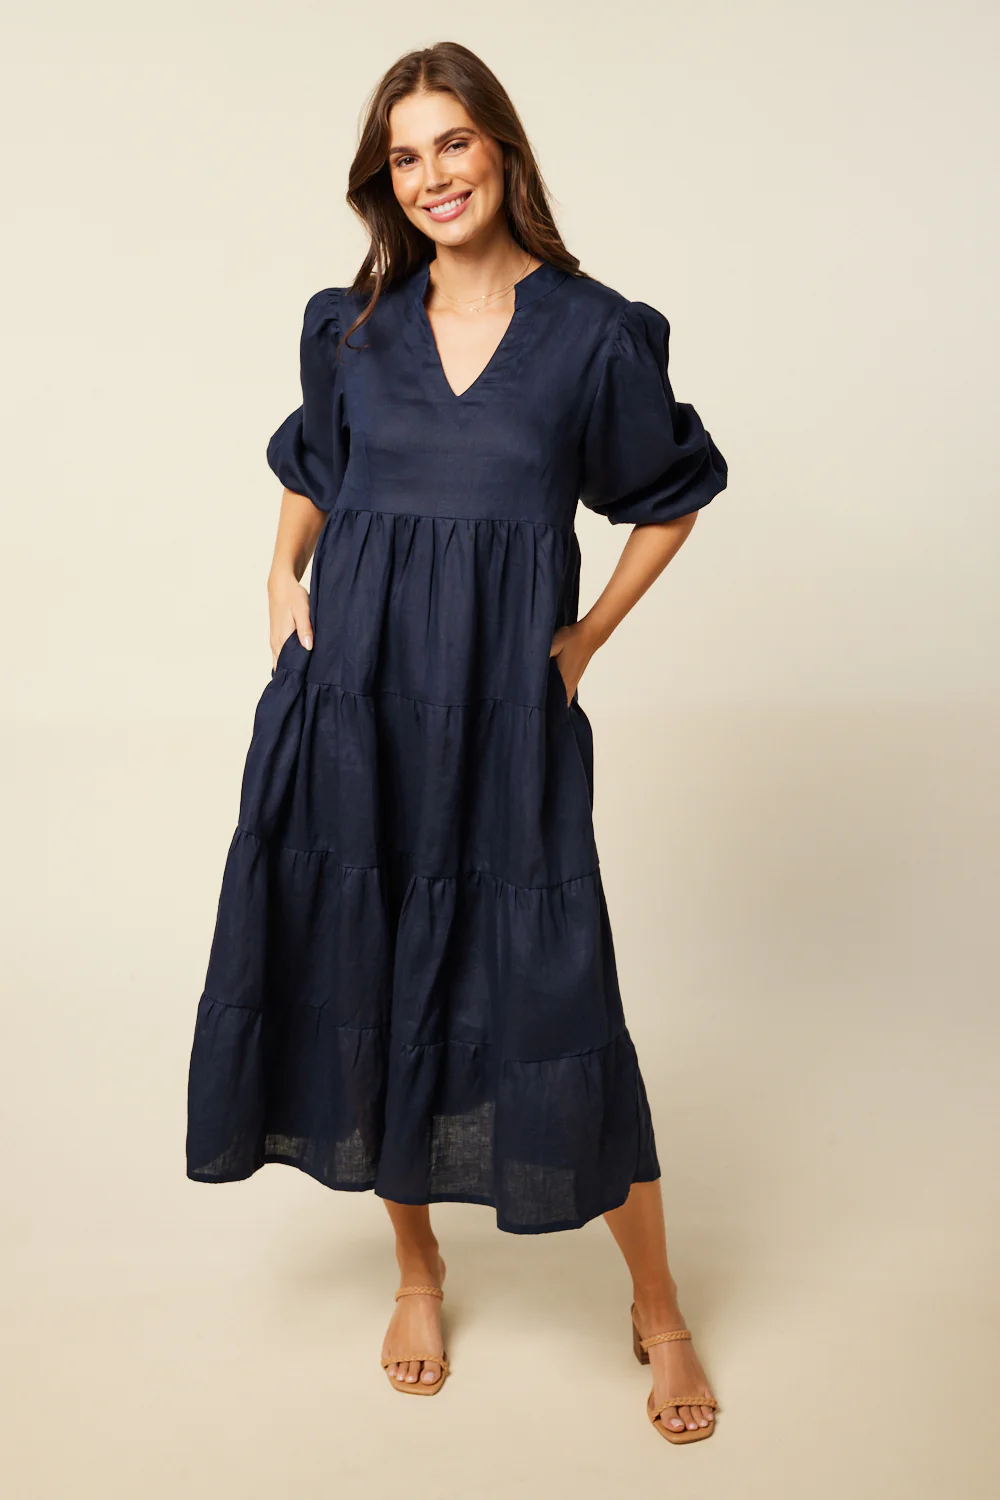 Woman in navy blue A Line style dress.